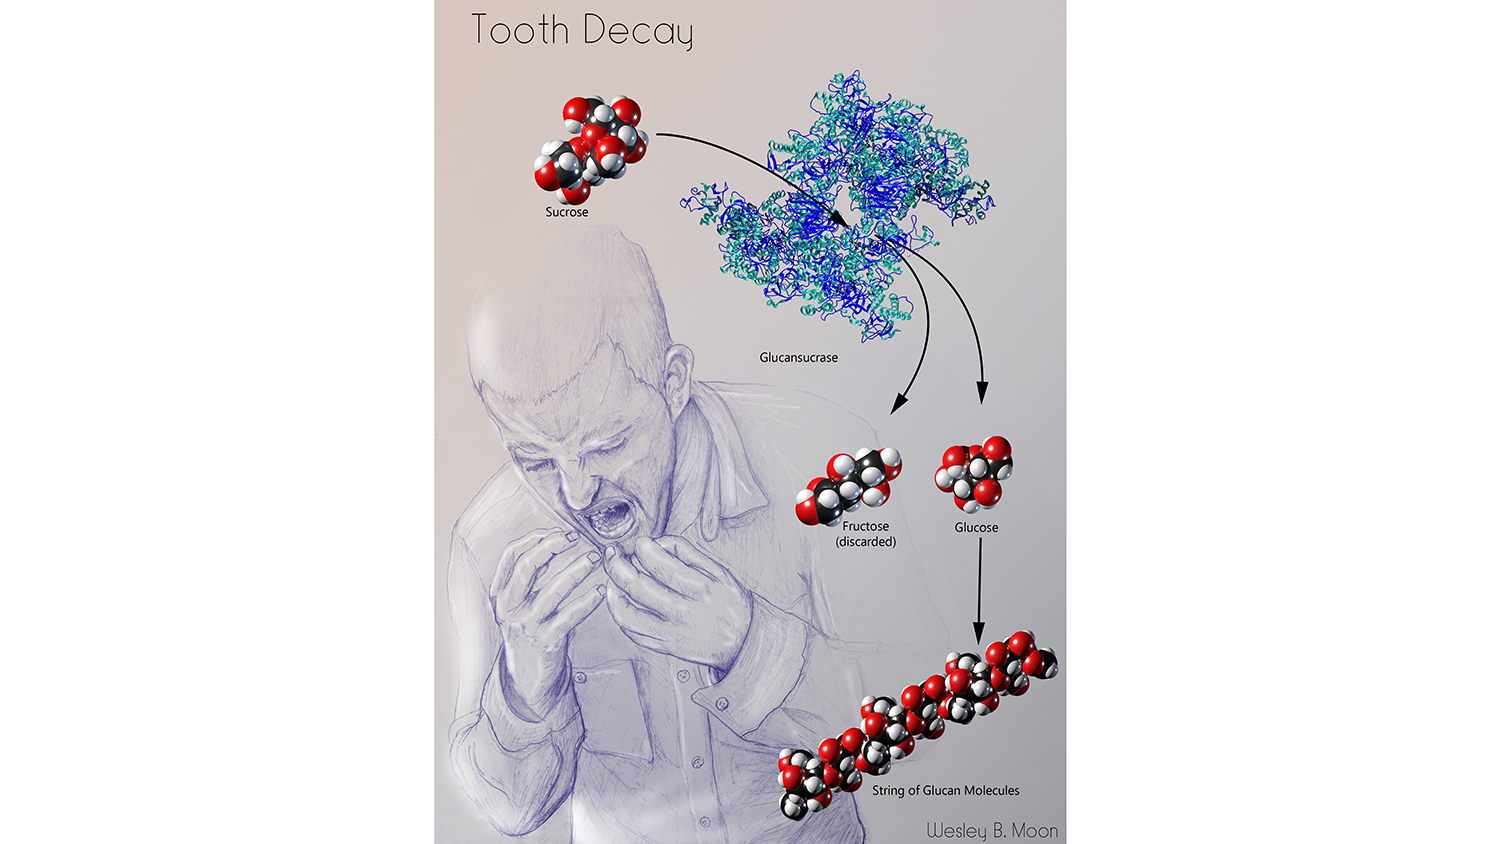 An illustration of tooth decay